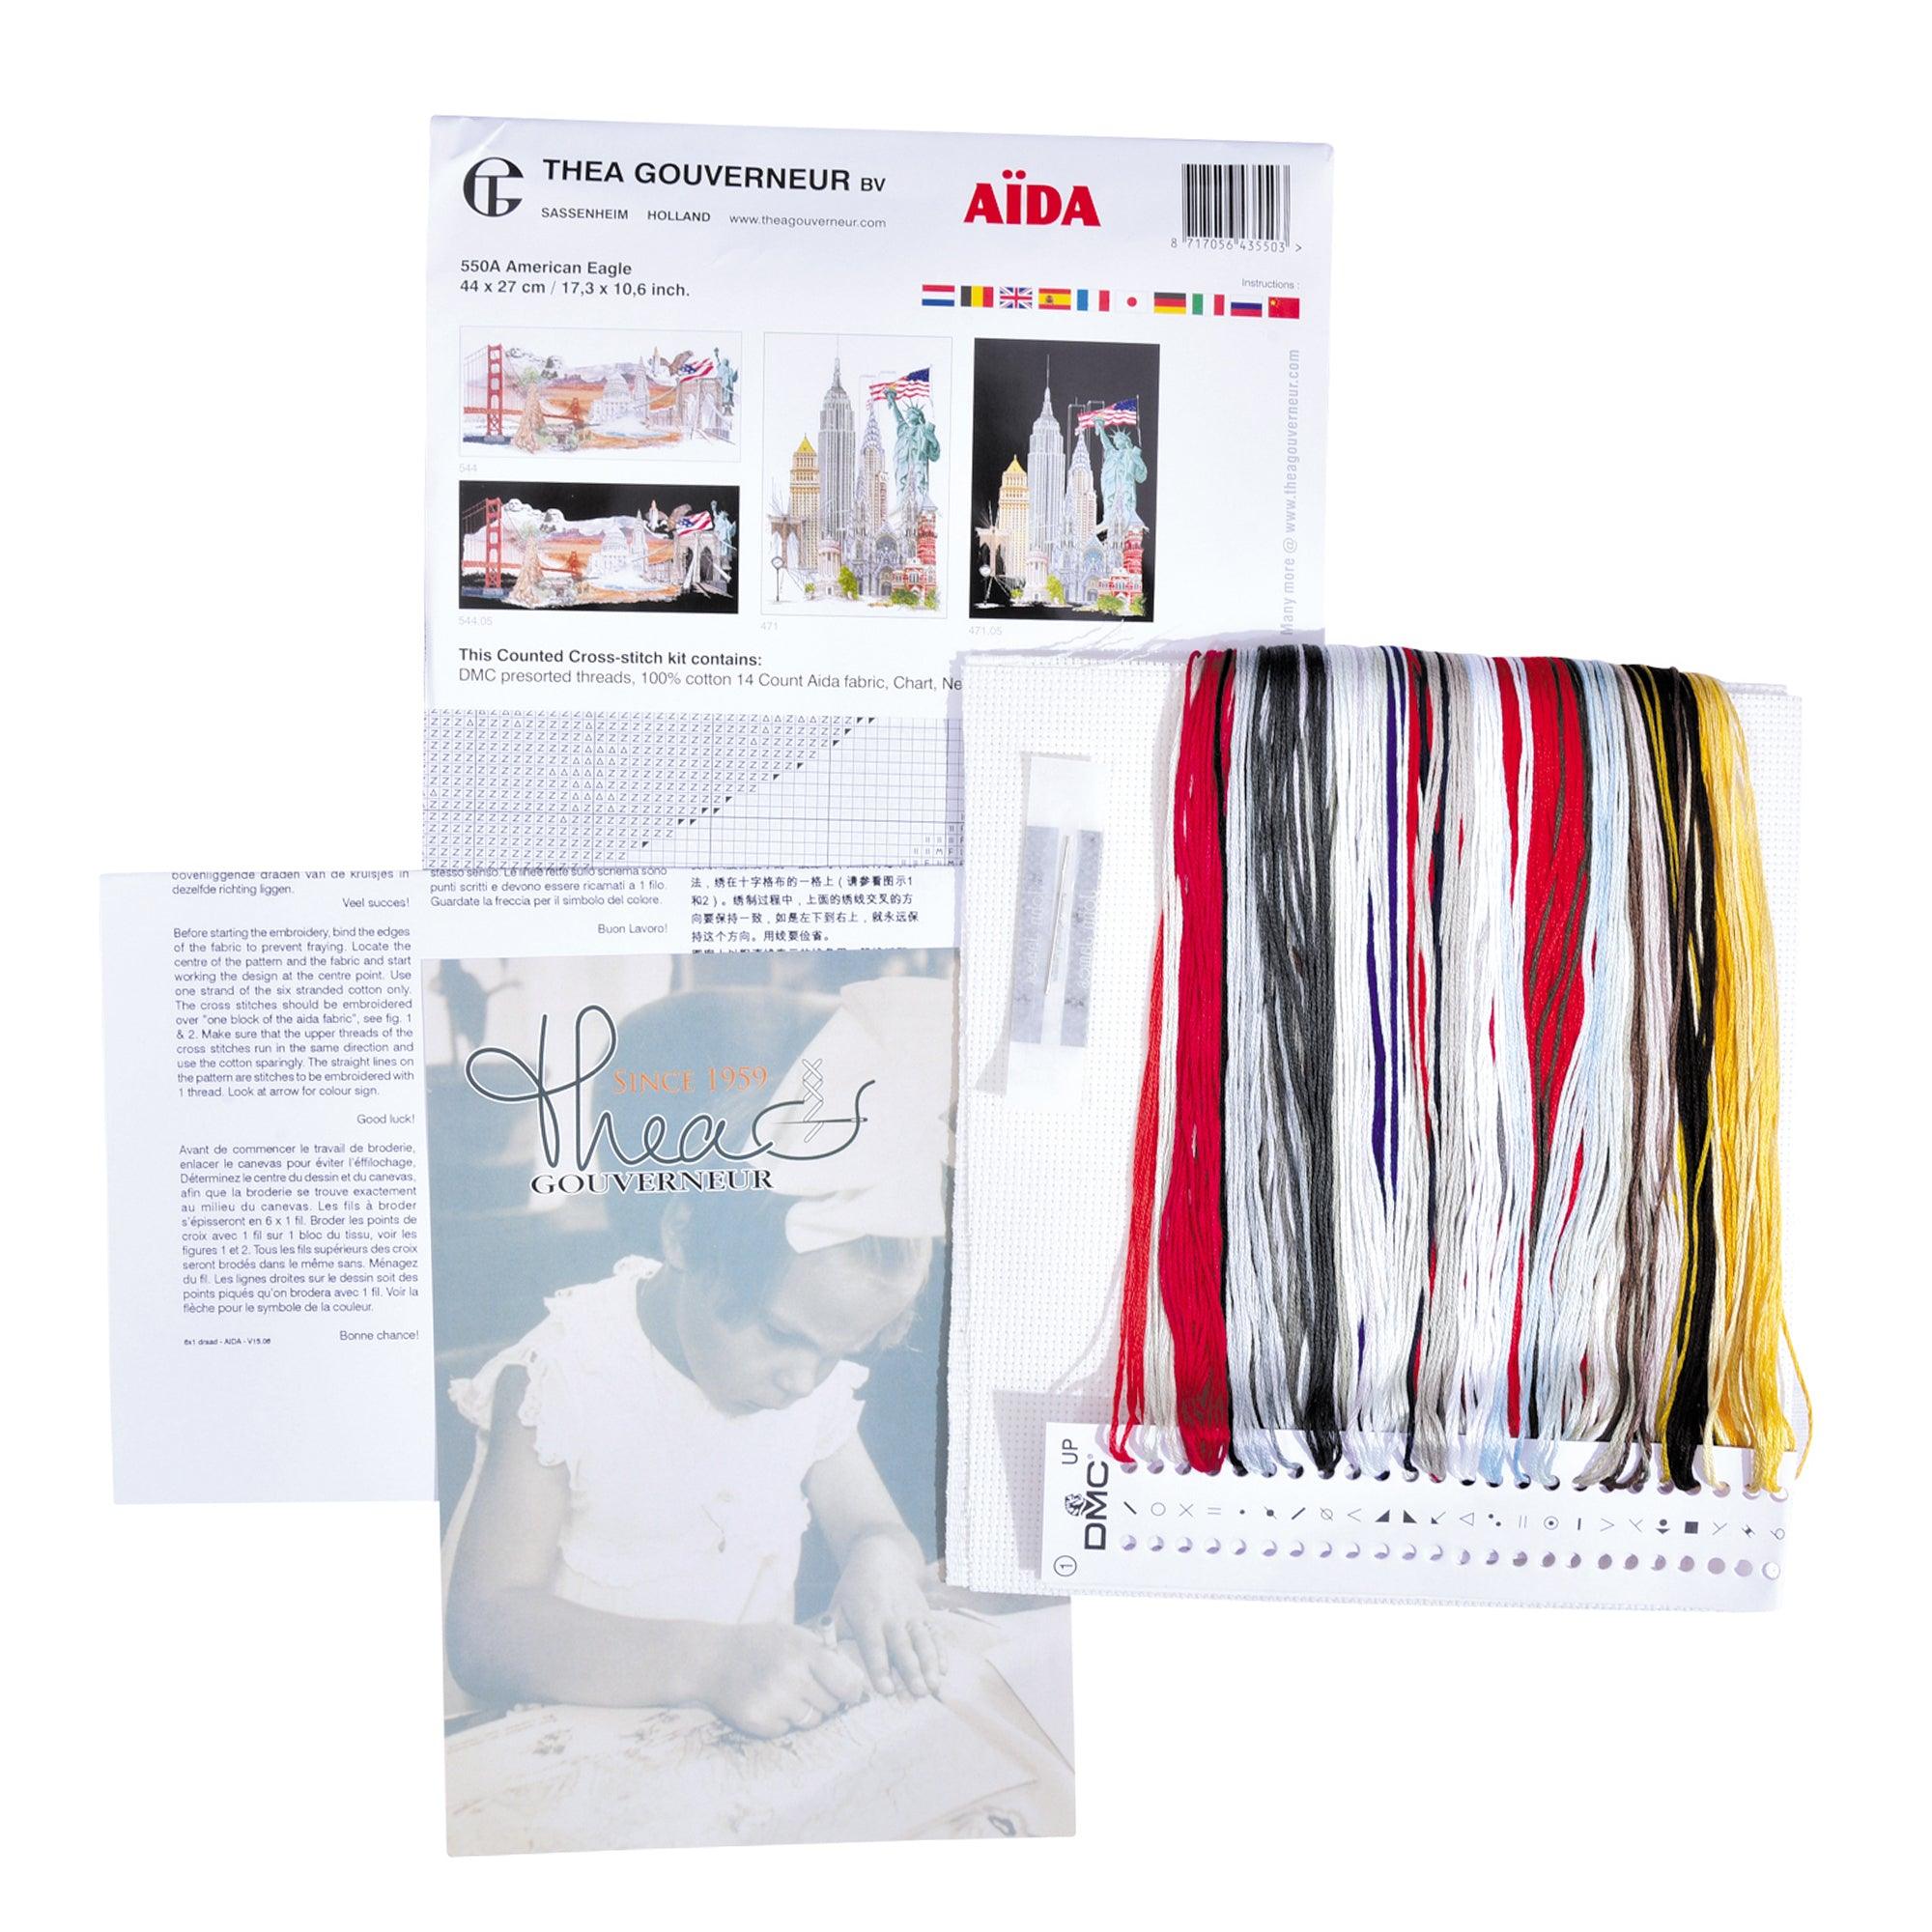 Thea Gouverneur - Counted Cross Stitch Kit - American Eagle - Aida - 14 count - 550A - Thea Gouverneur Since 1959